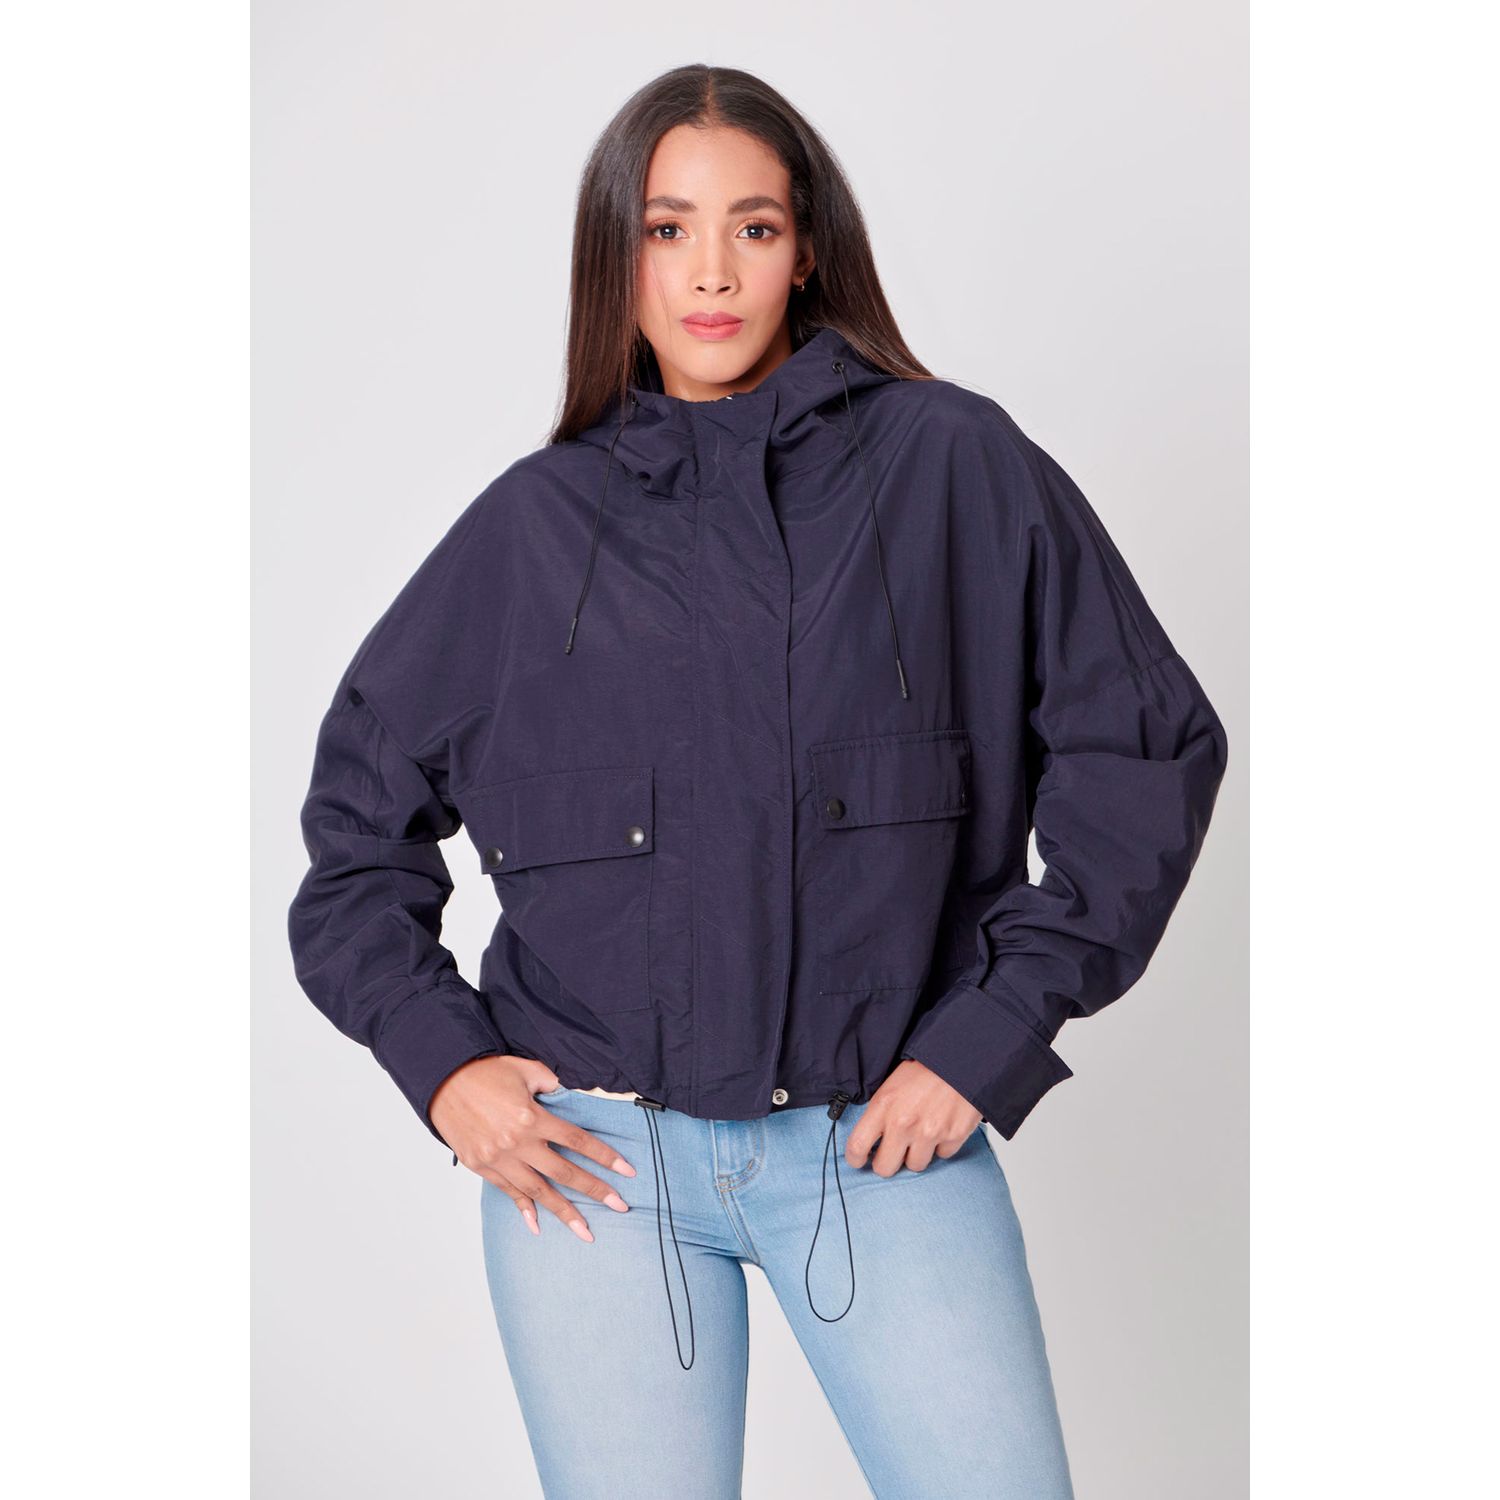 CHAQUETA OSCURO PARA MUJER - quest